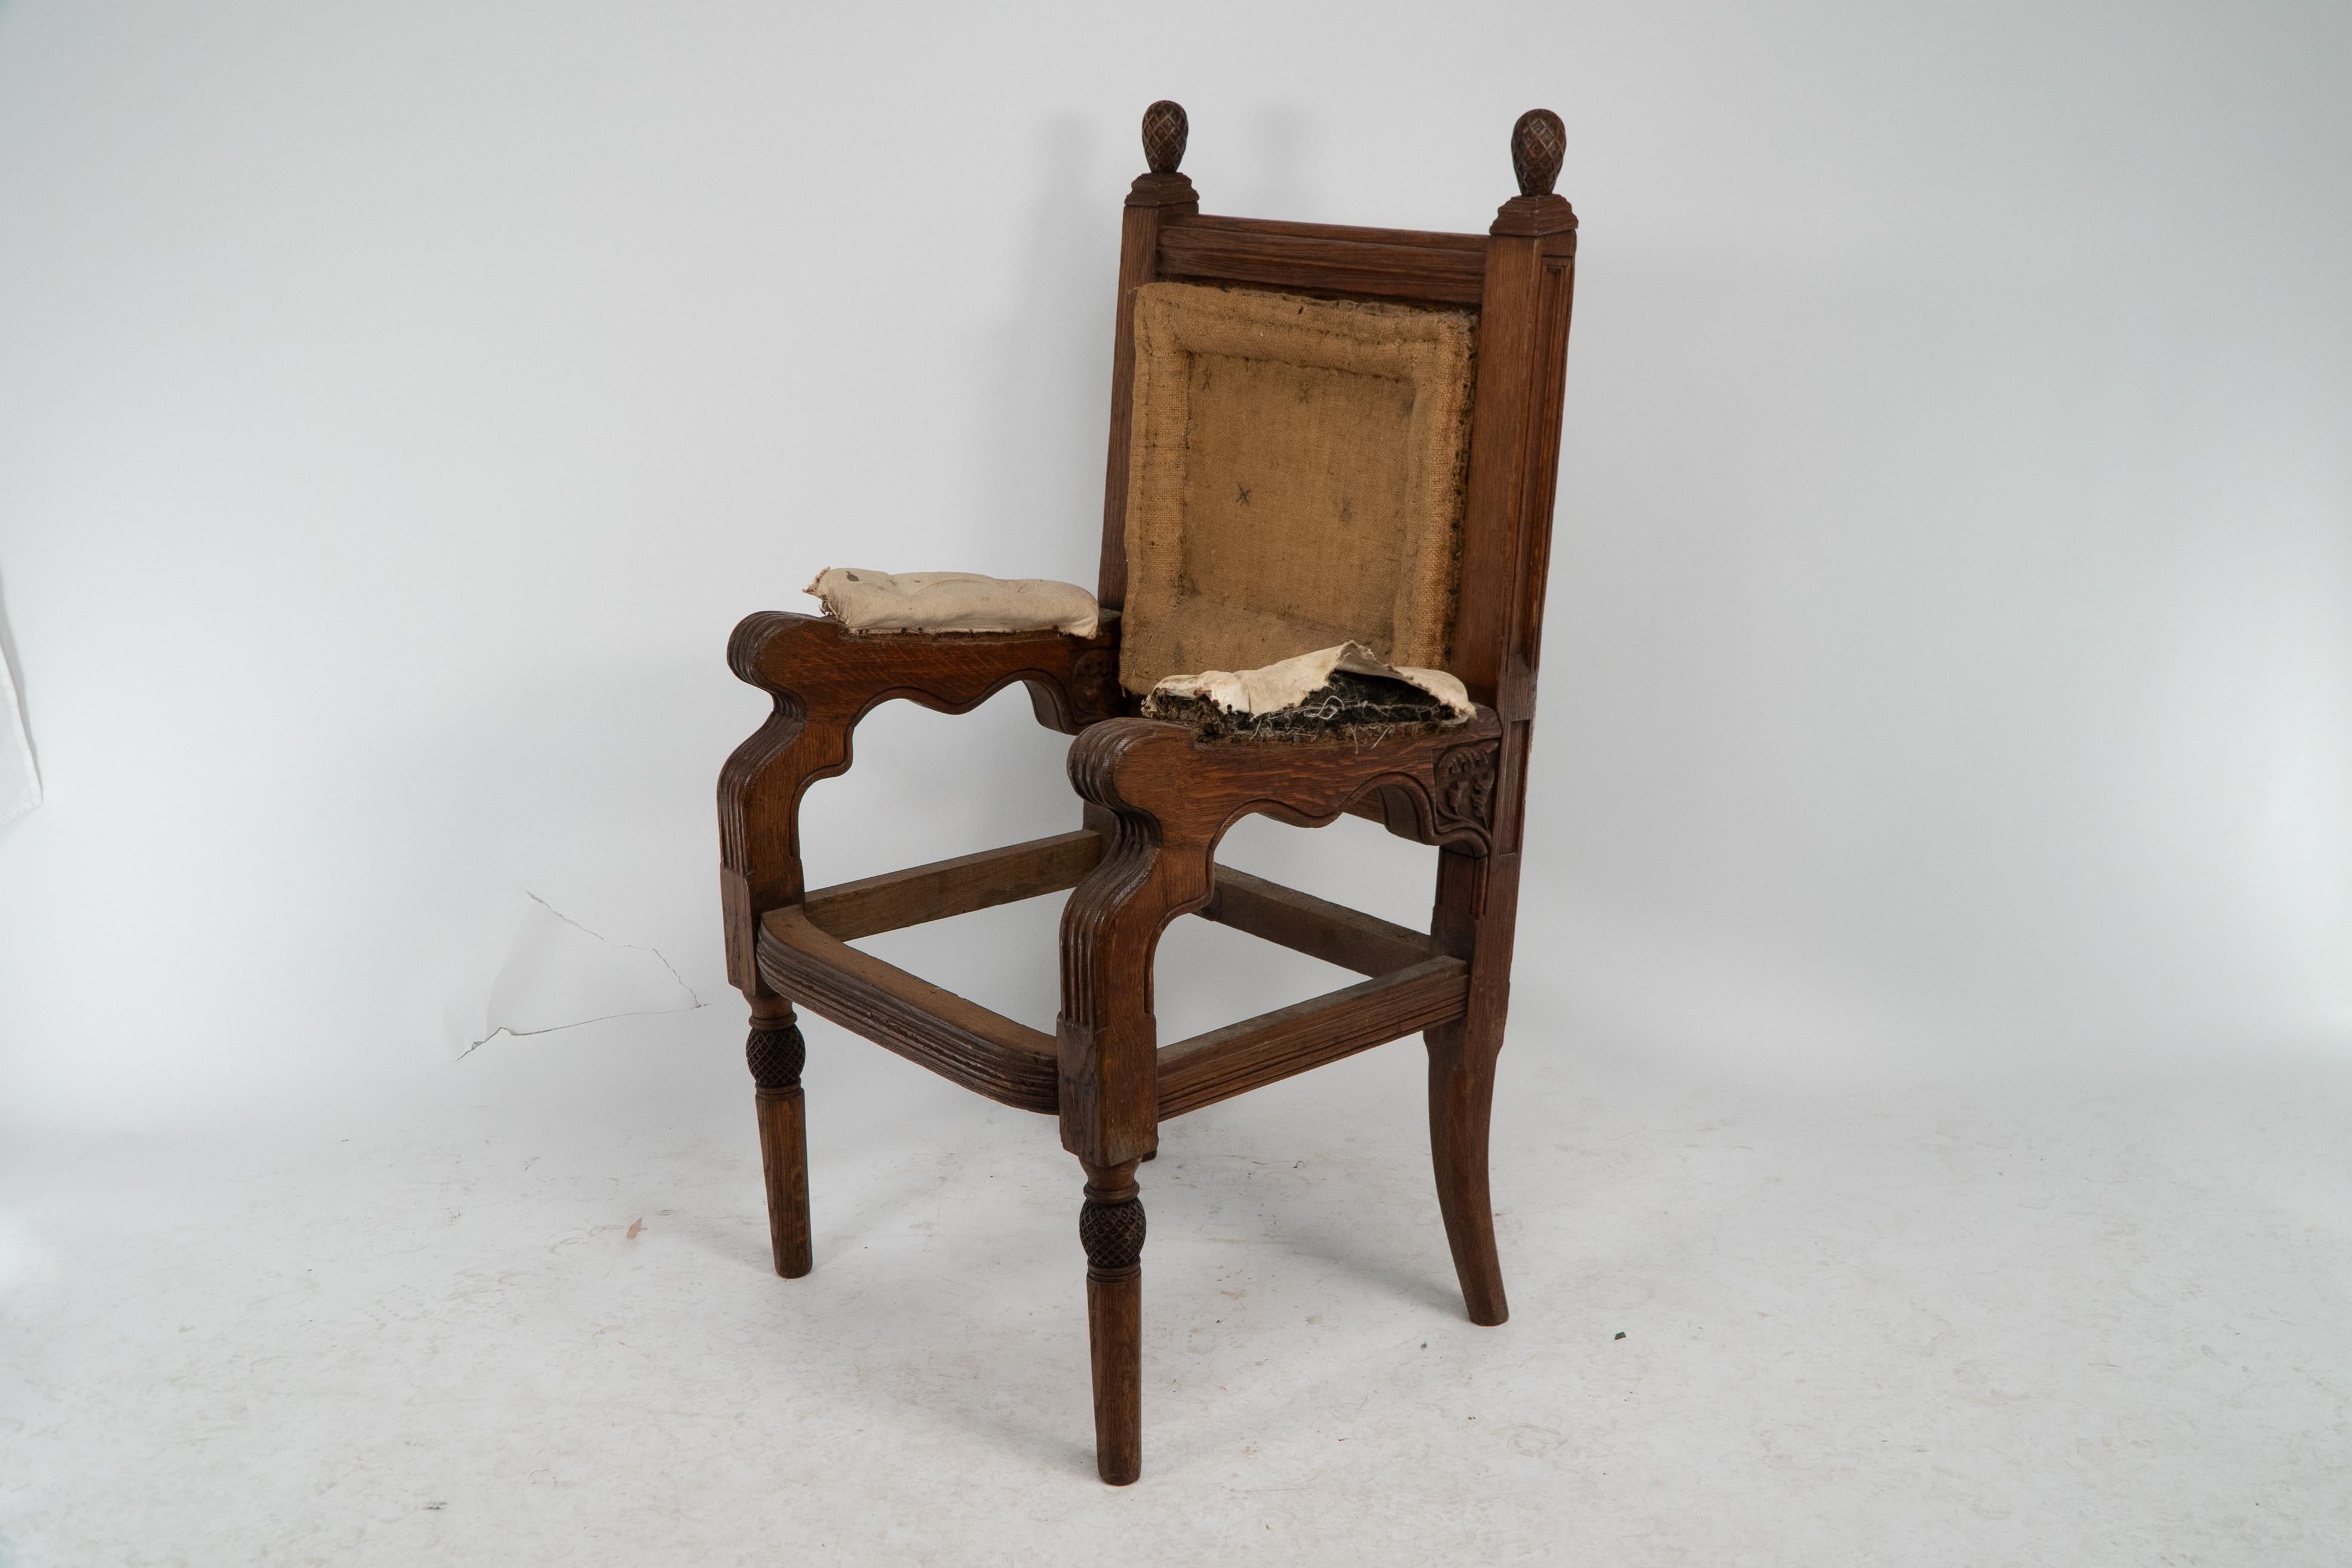 Gothic Revival George Edmund Street. Judges armchair designed for The Royal Courts of Justice. For Sale